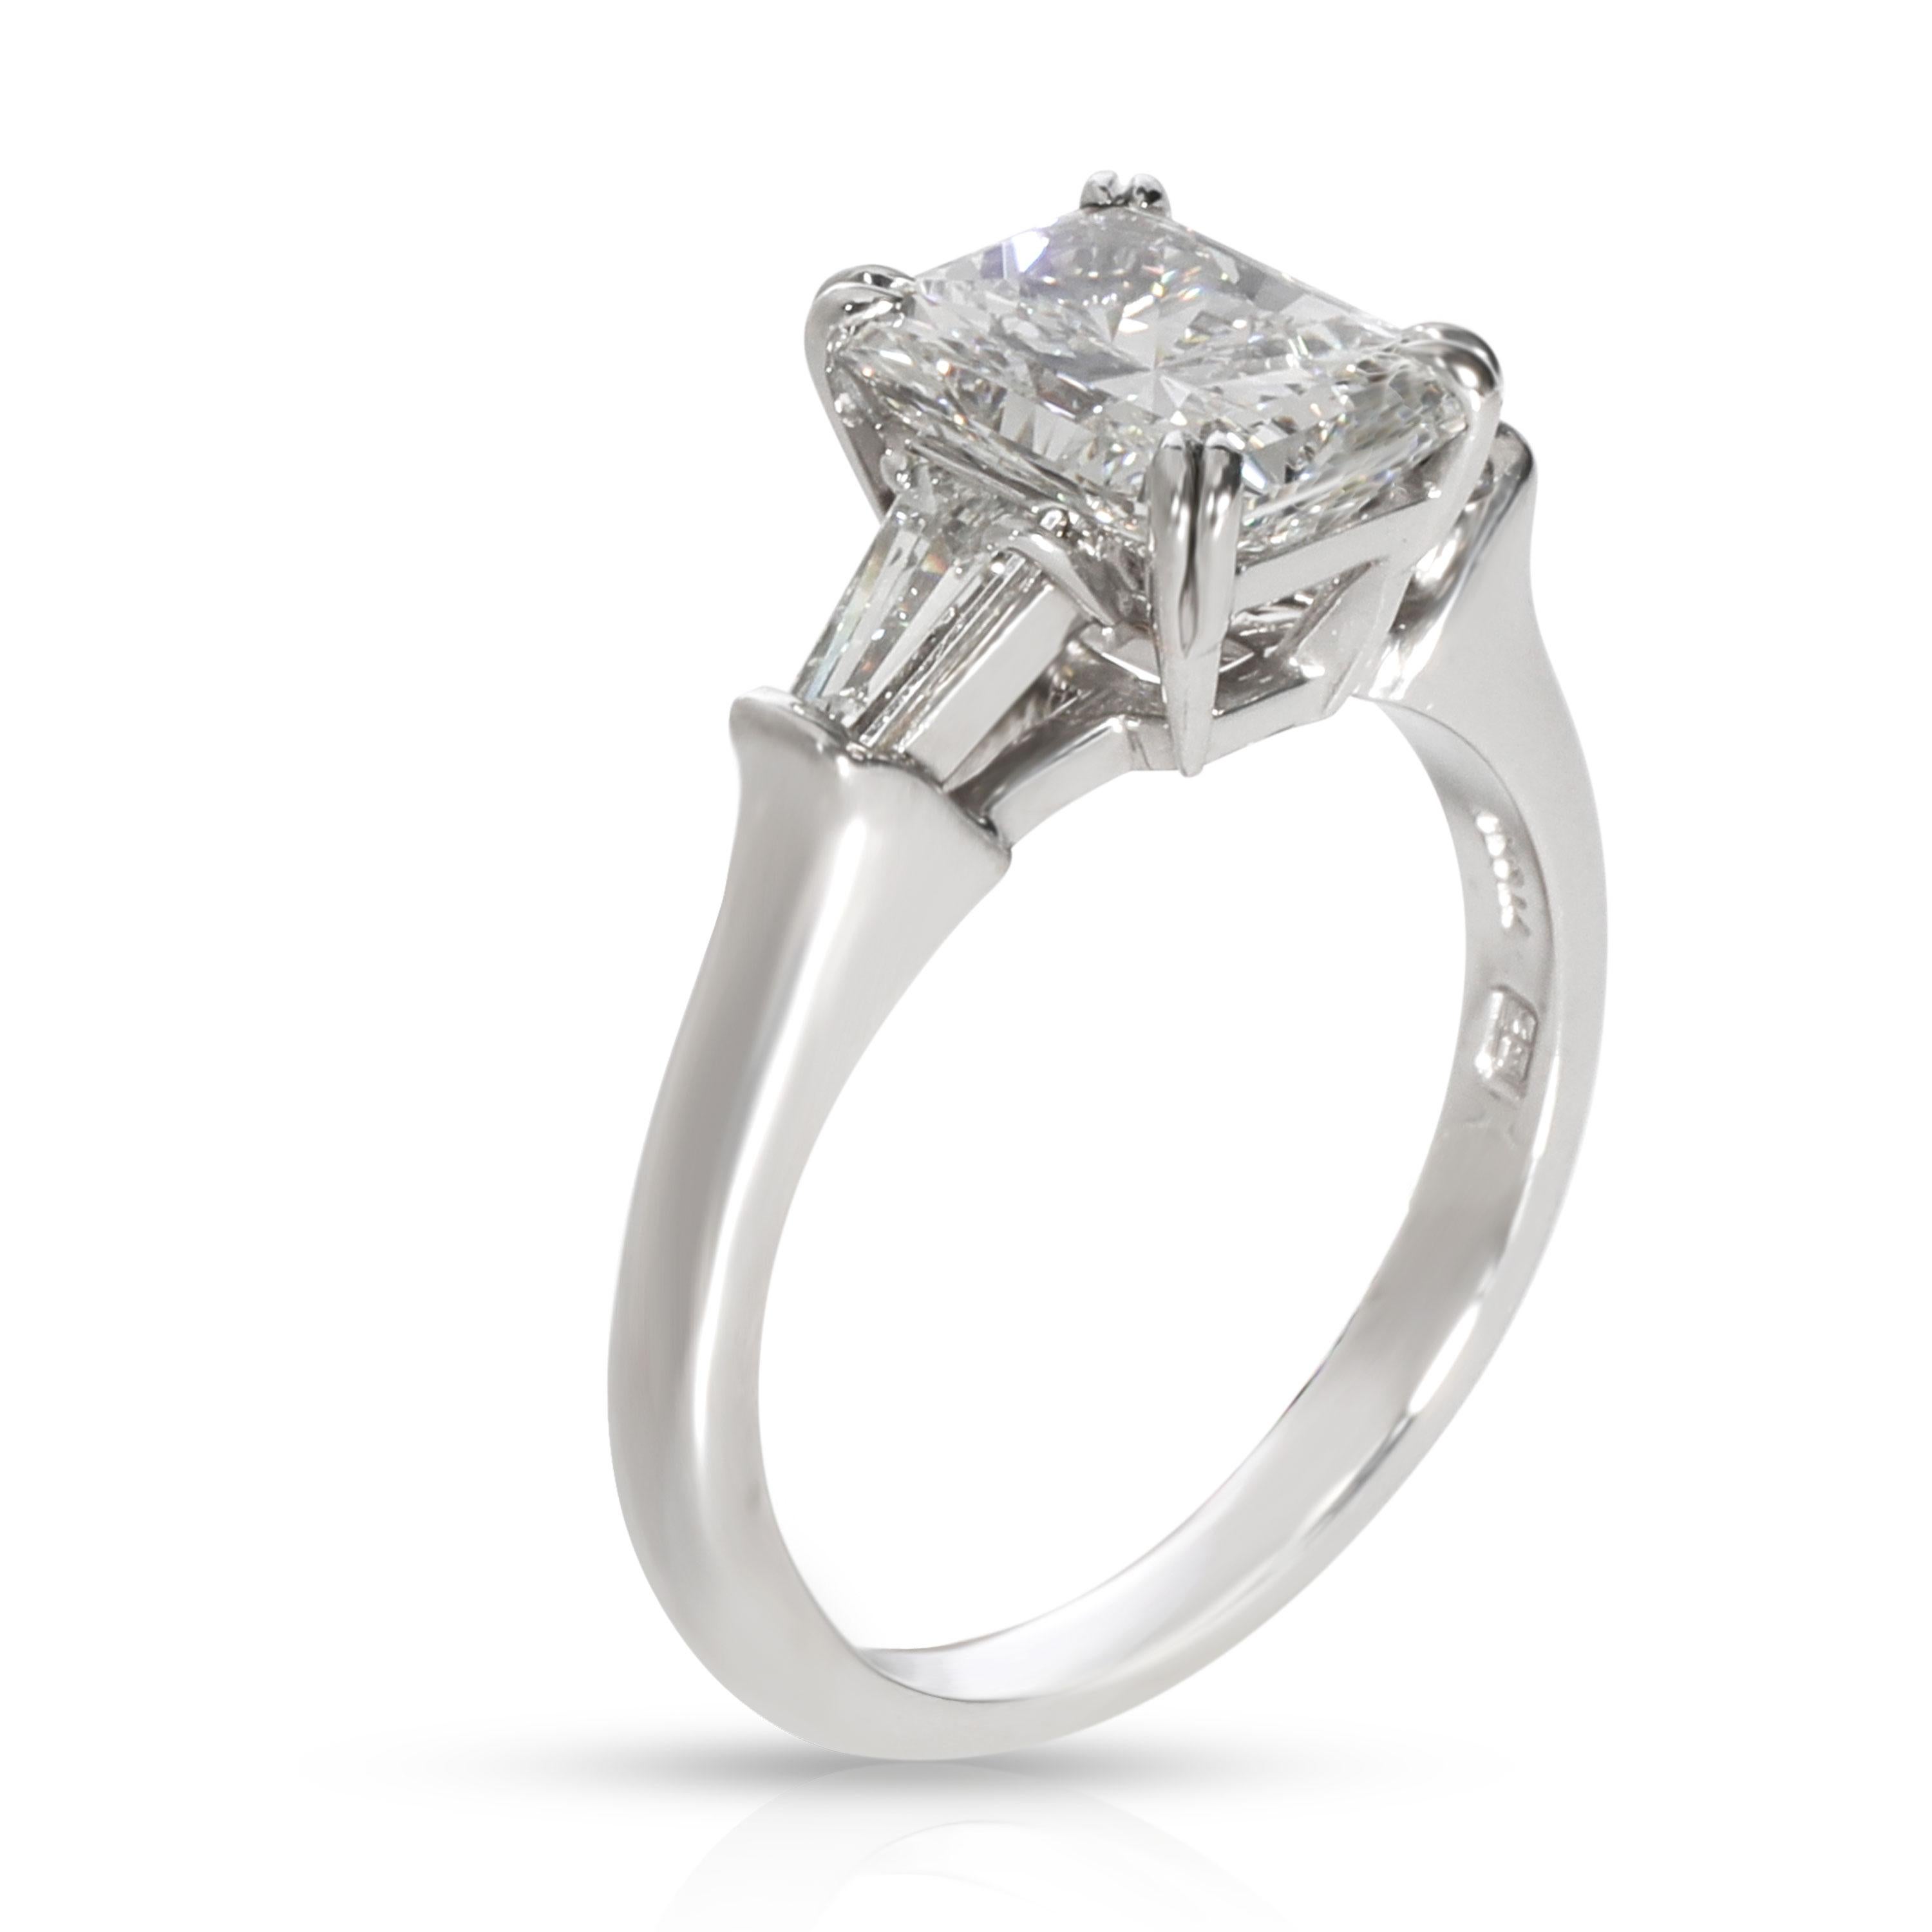 Harry Winston Radiant Diamond Engagement Ring in Platinum GIA F VVS1 2.41 CTW

PRIMARY DETAILS
SKU: 107637
Listing Title: Harry Winston Radiant Diamond Engagement Ring in Platinum GIA F VVS1 2.41 CTW
Condition Description: Retails for 70,000 USD. In